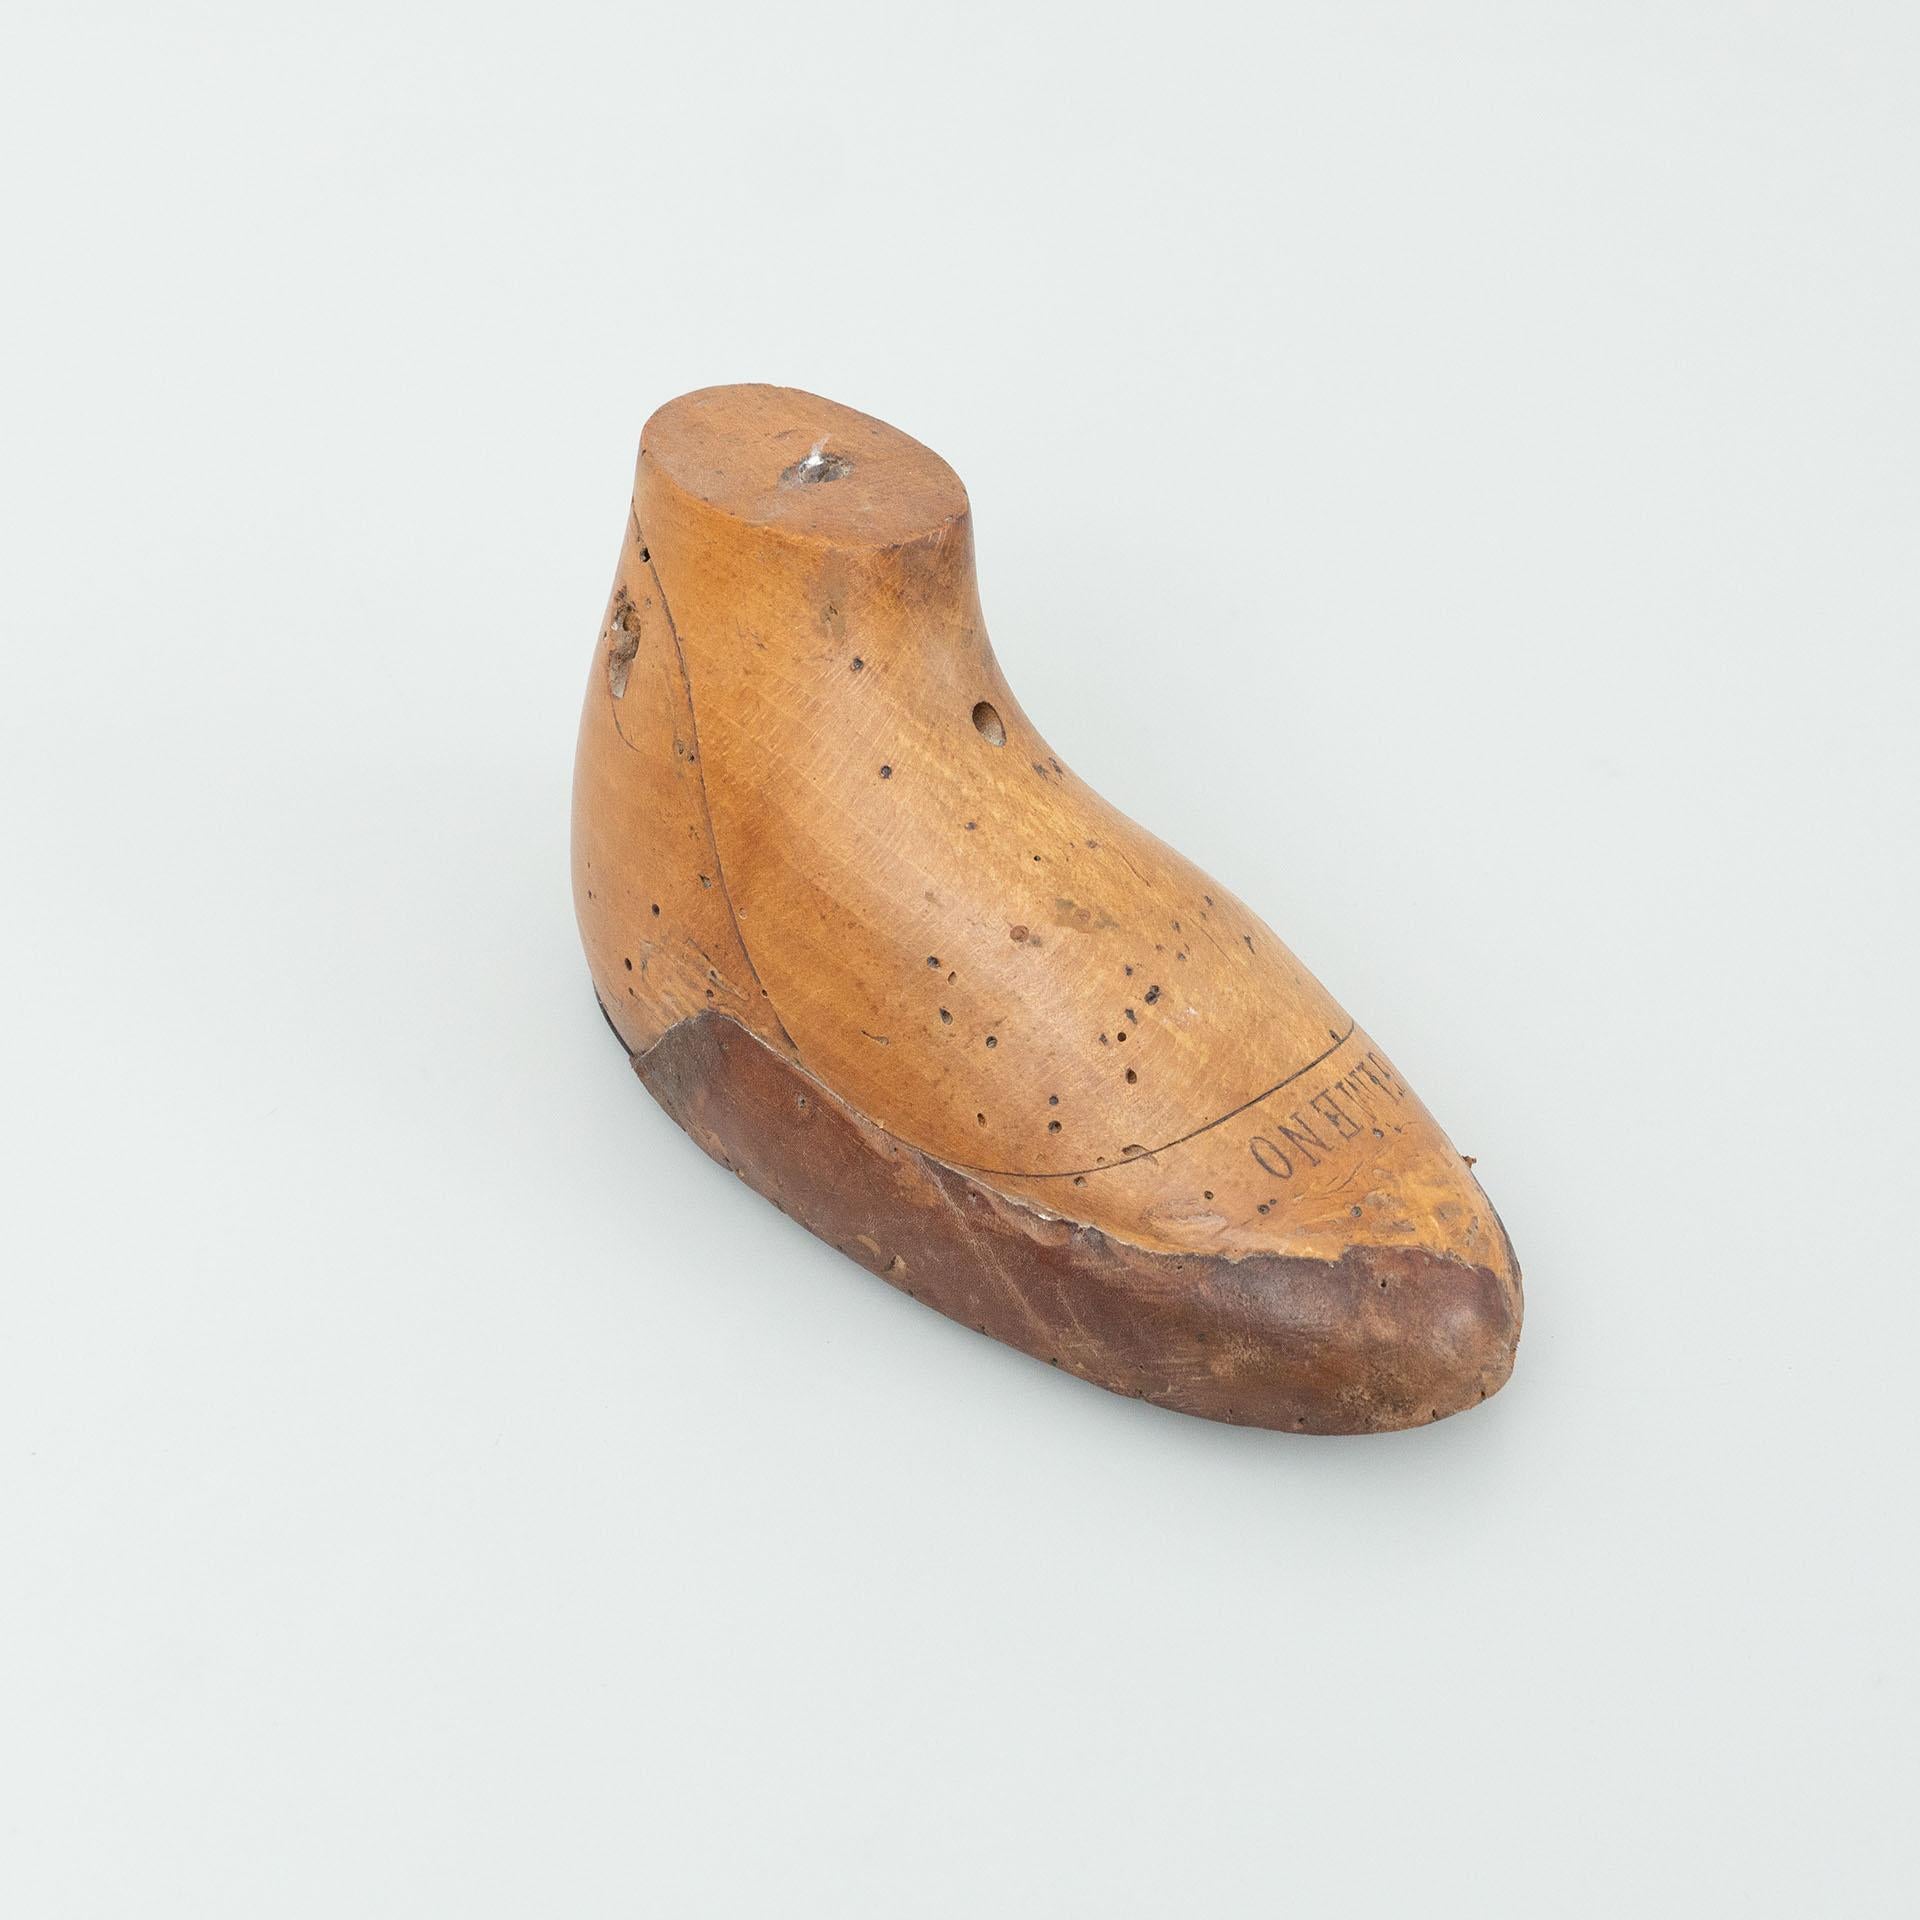 Vintage wooden shoe last.
By unknown manufacturer from Spain, circa 1940.

In original condition, with minor wear consistent with age and use, preserving a beautiful patina.

Material:
Wood

Dimensions:
D 23 cm x W 10 cm x H 12 cm.